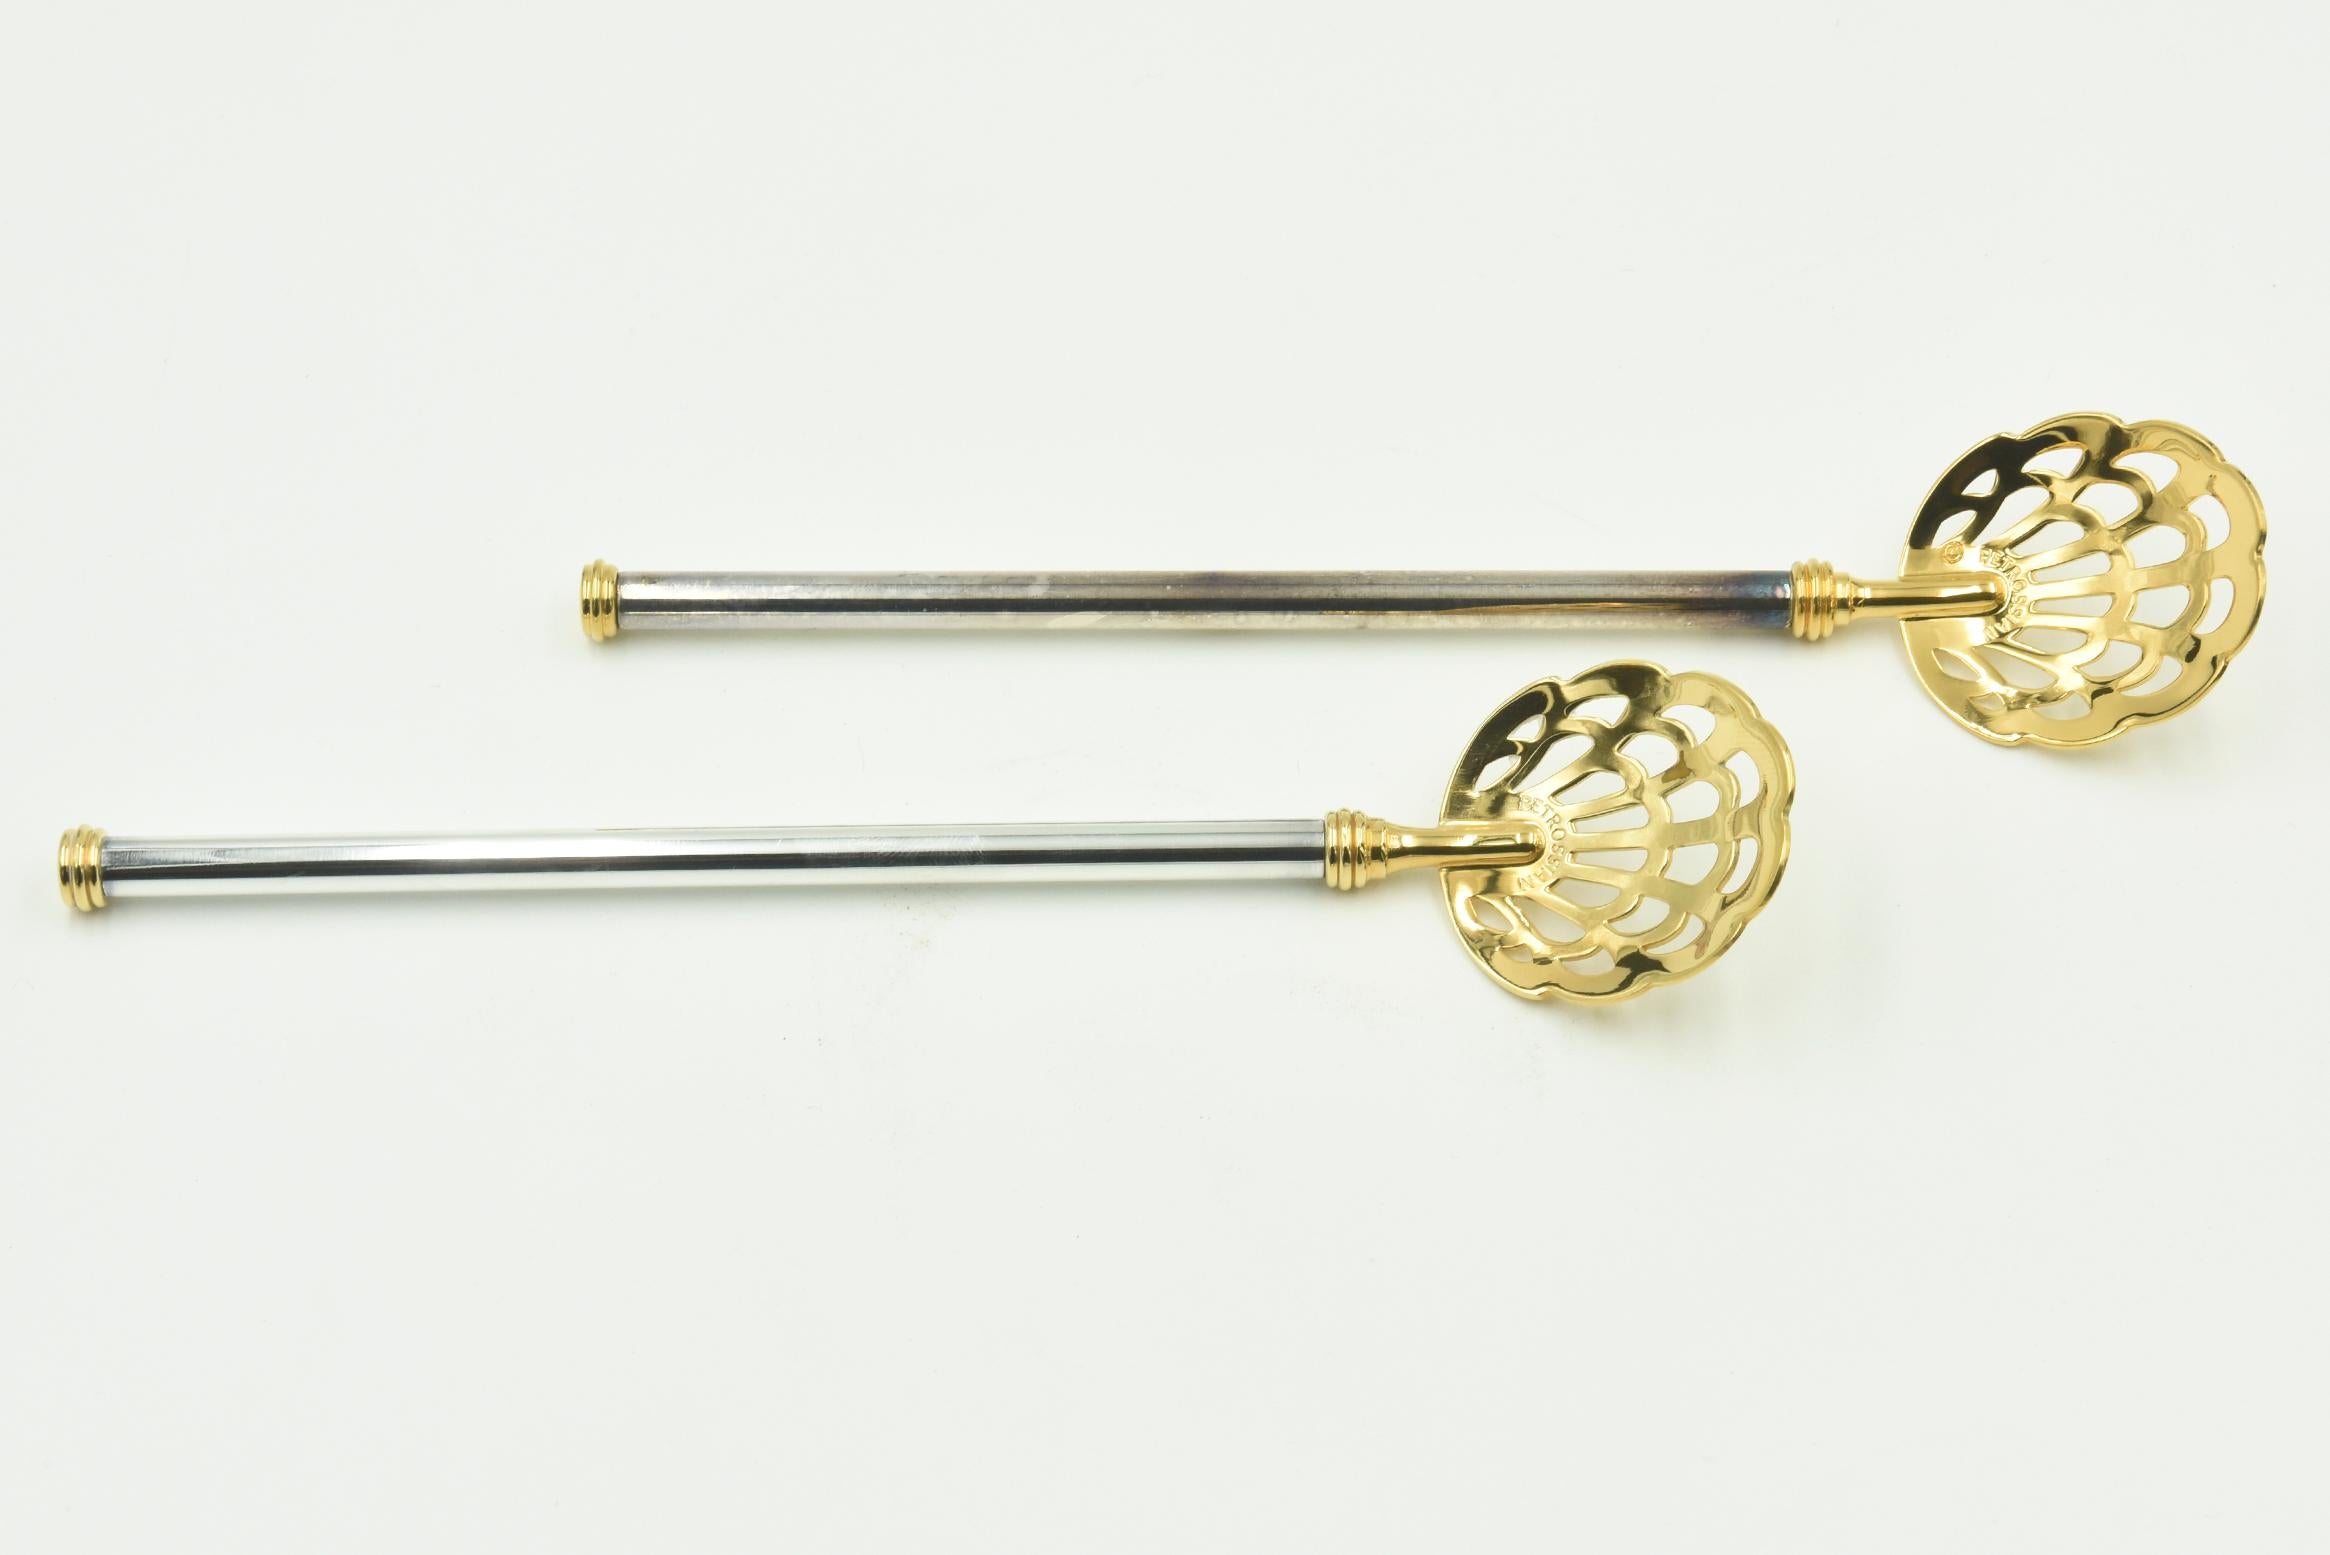 Vintage pair of Caviar pierced serving spoons by Petrossian featuring a gold plated pierced spoon and tip and a silver plated handle.

For nearly 90 years, the Petrossian family has served some of the finest caviar to connoisseurs across the